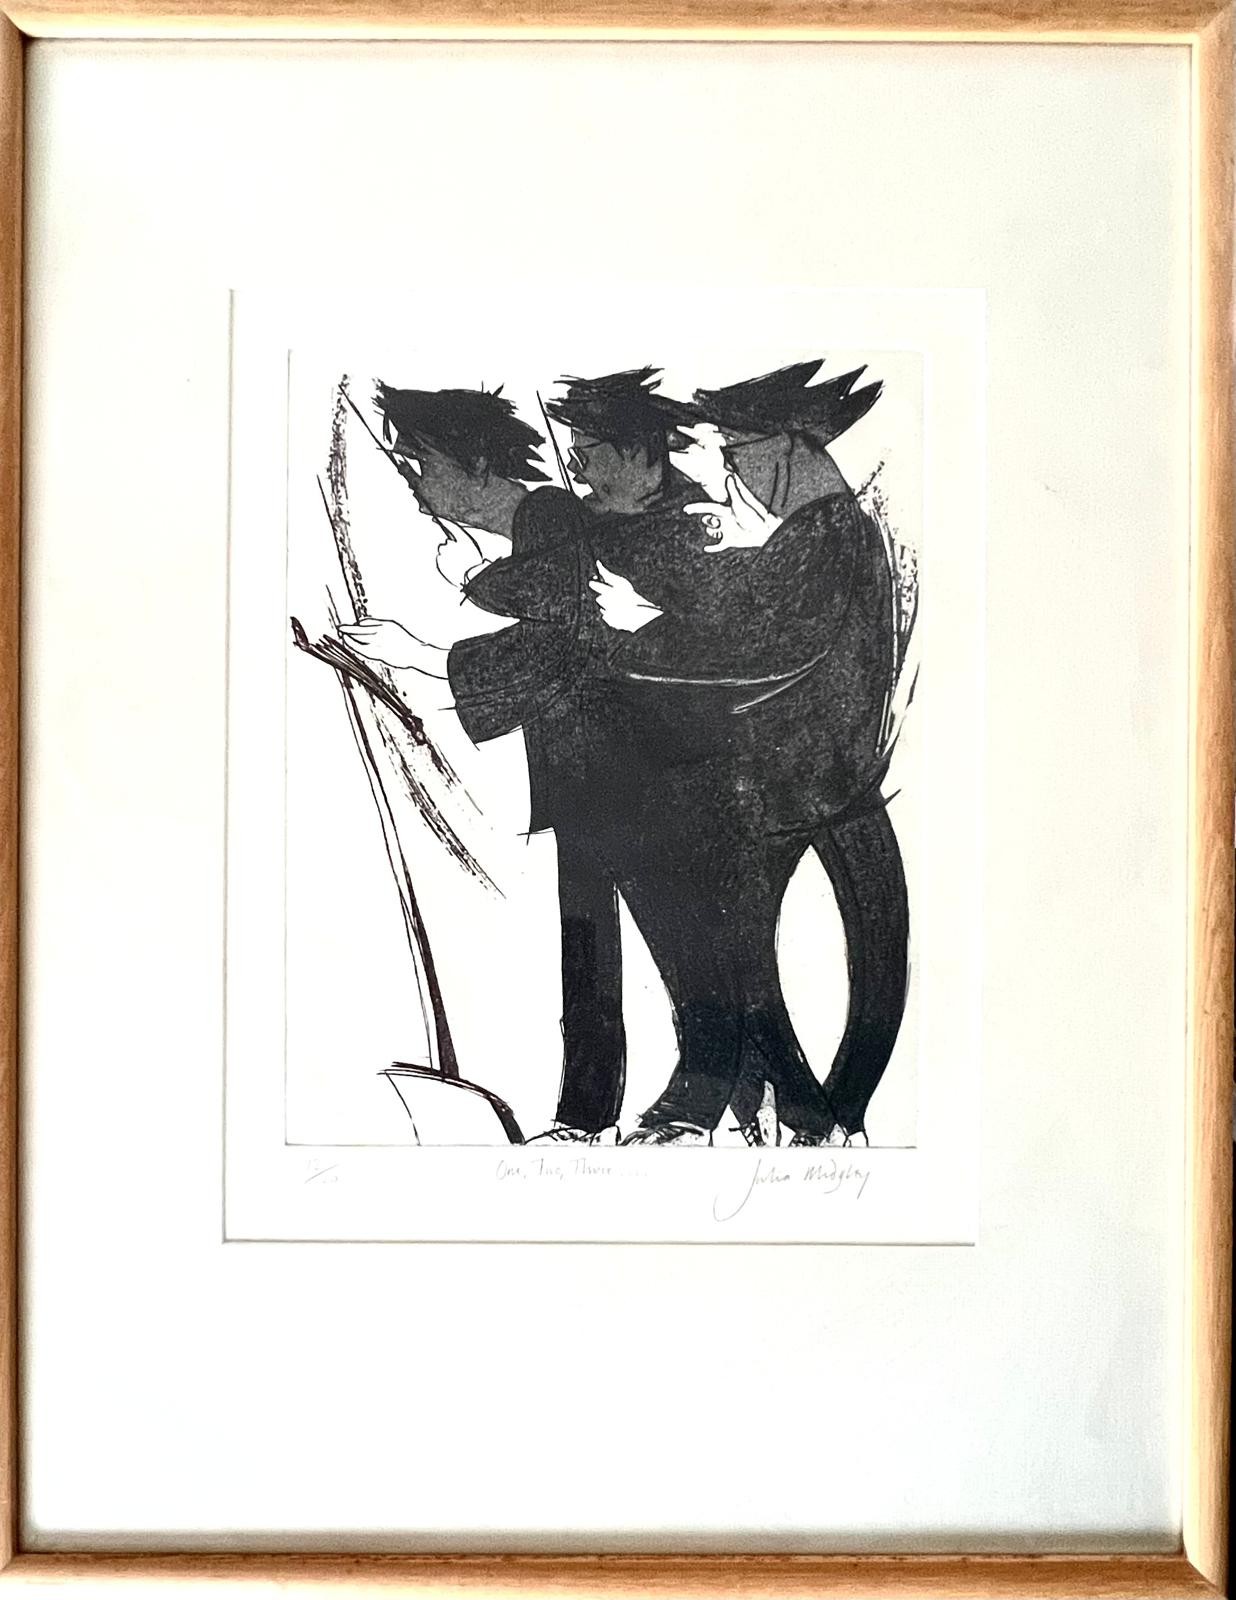 JULIA MIDGLEY, LITHOGRAPH, '1,2,3', MANCHESTER COLLEGE OF MUSIC, 12 OF 20, SIGNED BOTTOM RIGHT,